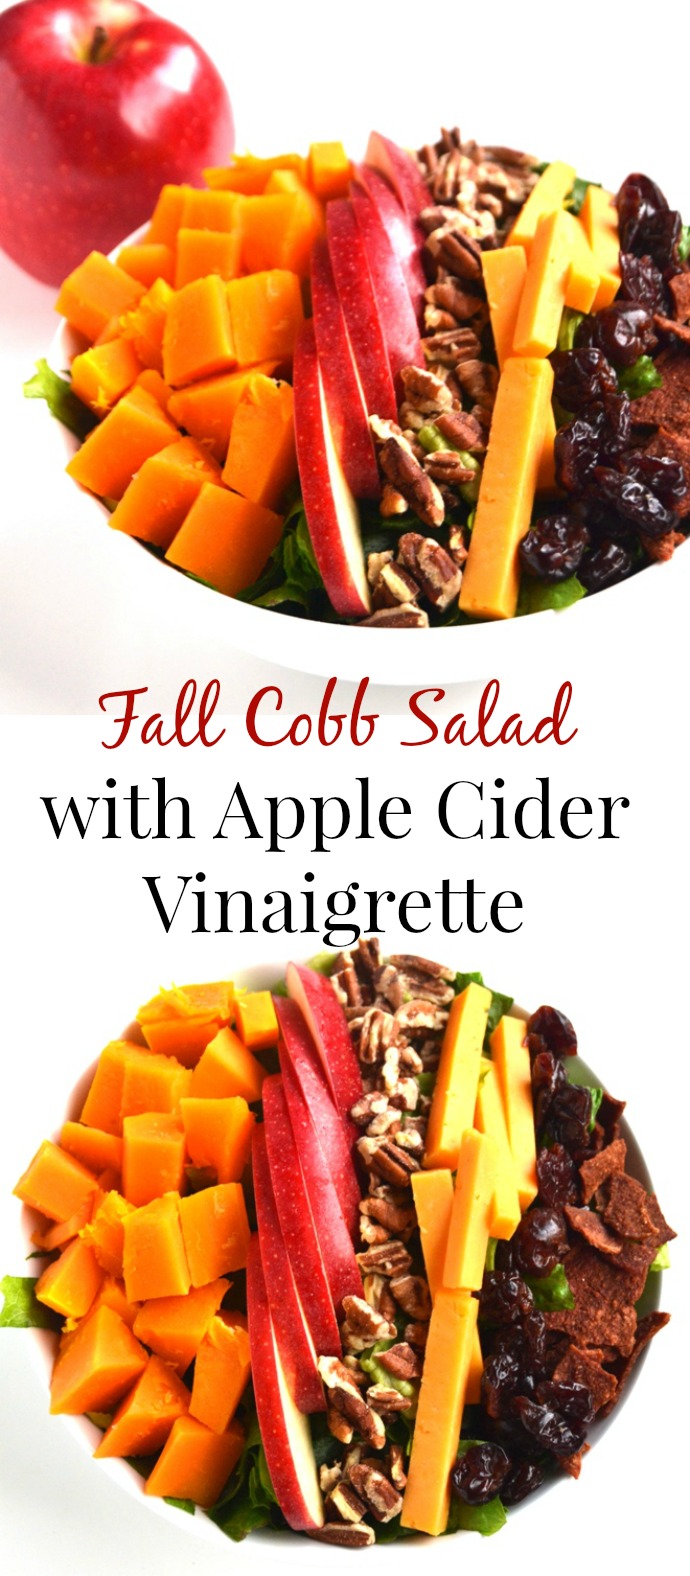 Fall Cobb Salad with Apple Cider Vinaigrette is loaded with roasted butternut squash, dried cherries, apples, pecans, bacon and cheddar for a delicious and hearty salad! www.nutritionistreviews.com